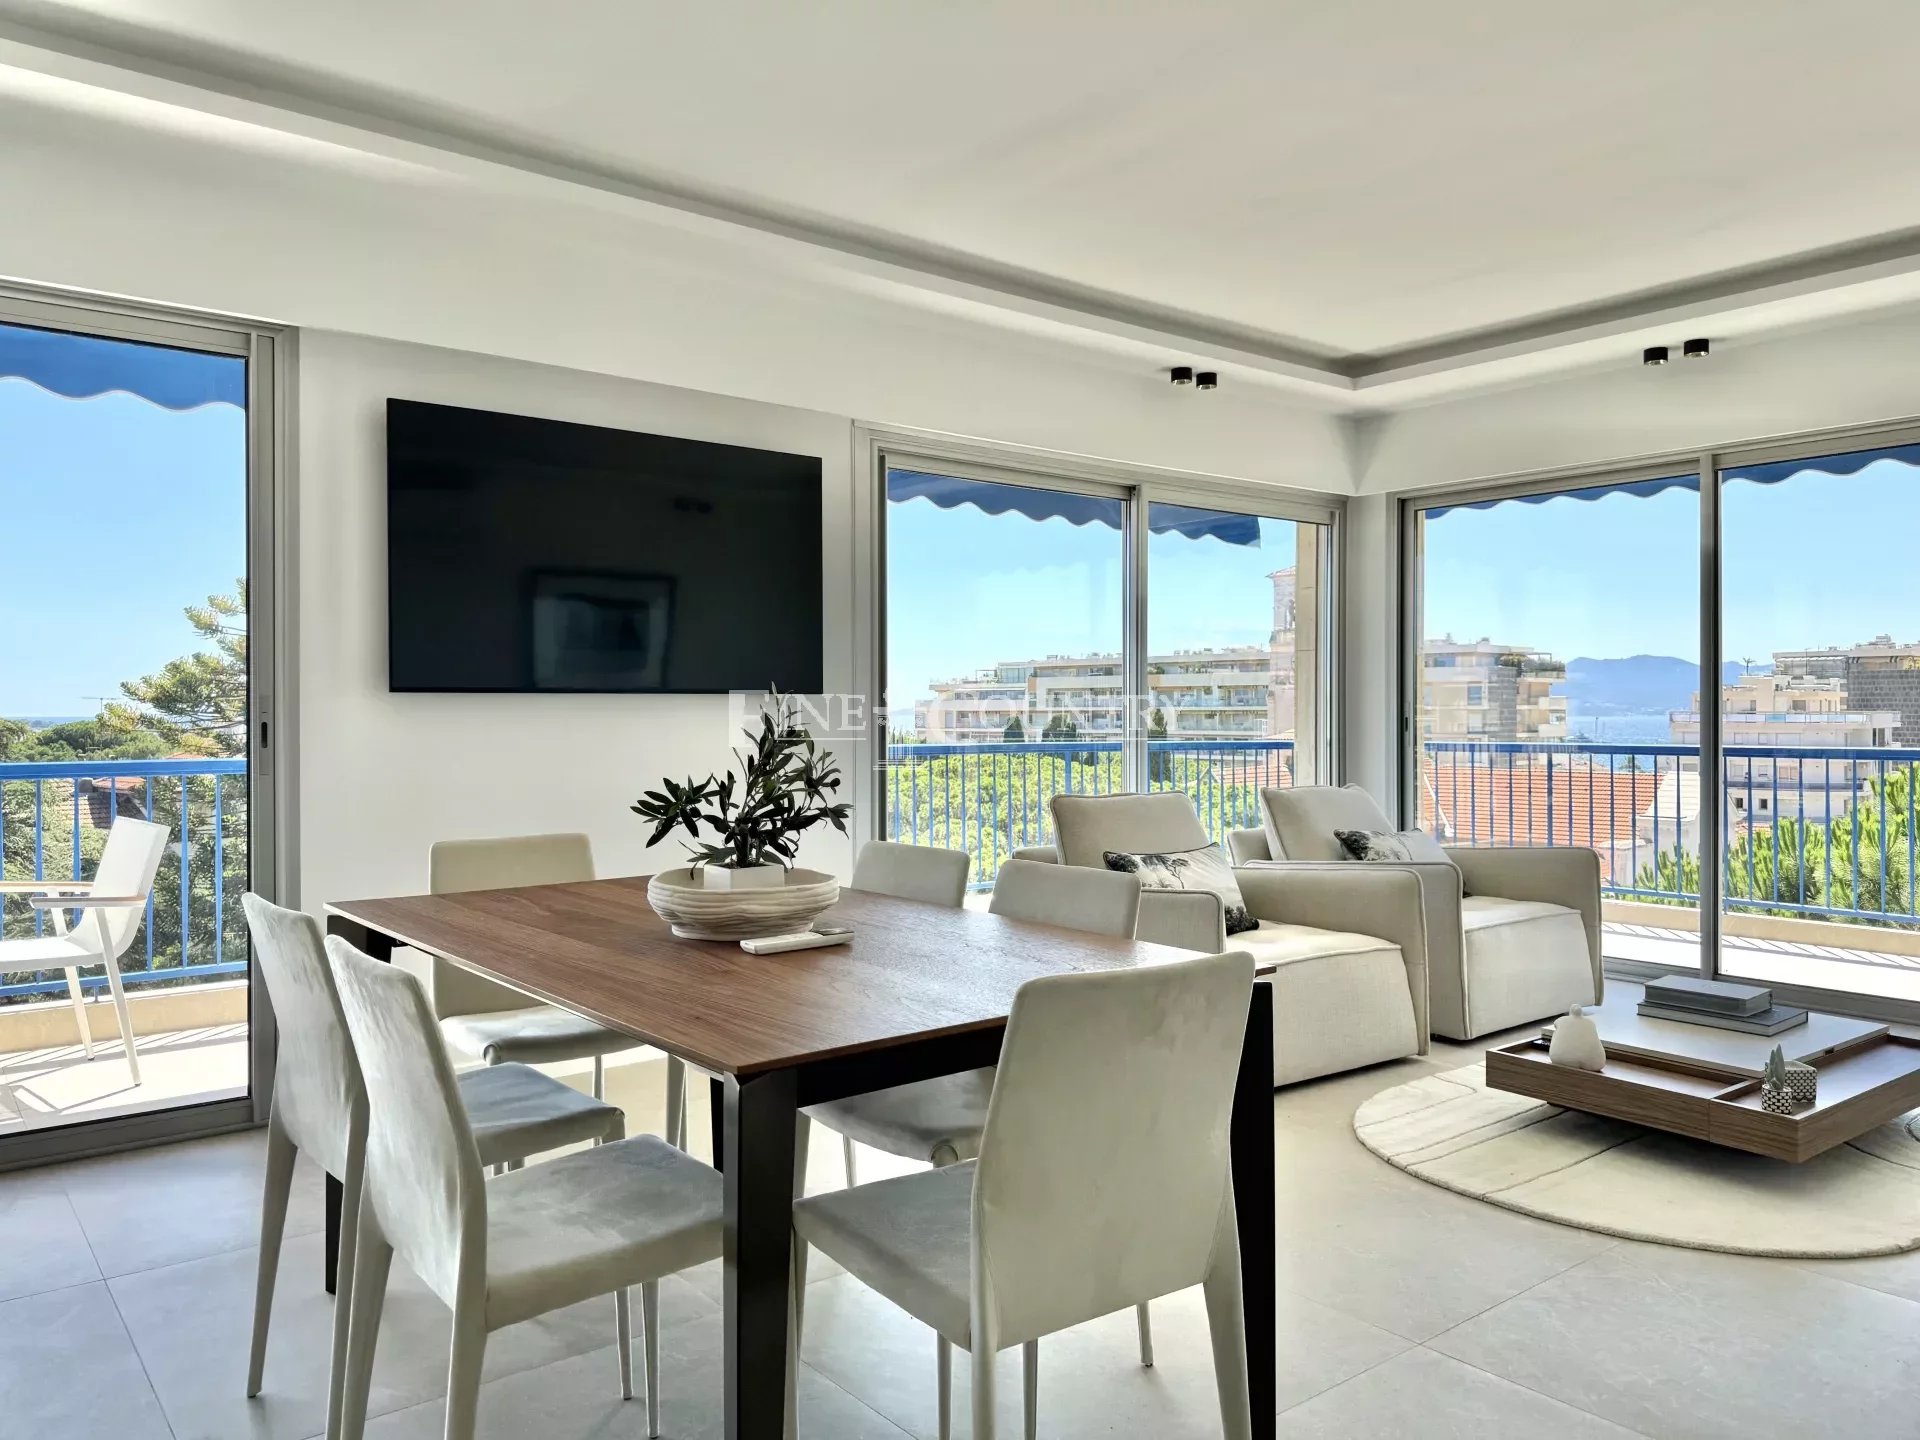 3 BEDROOM APPARTEMENT FOR SALE CANNES BASSE CALIFORNIE